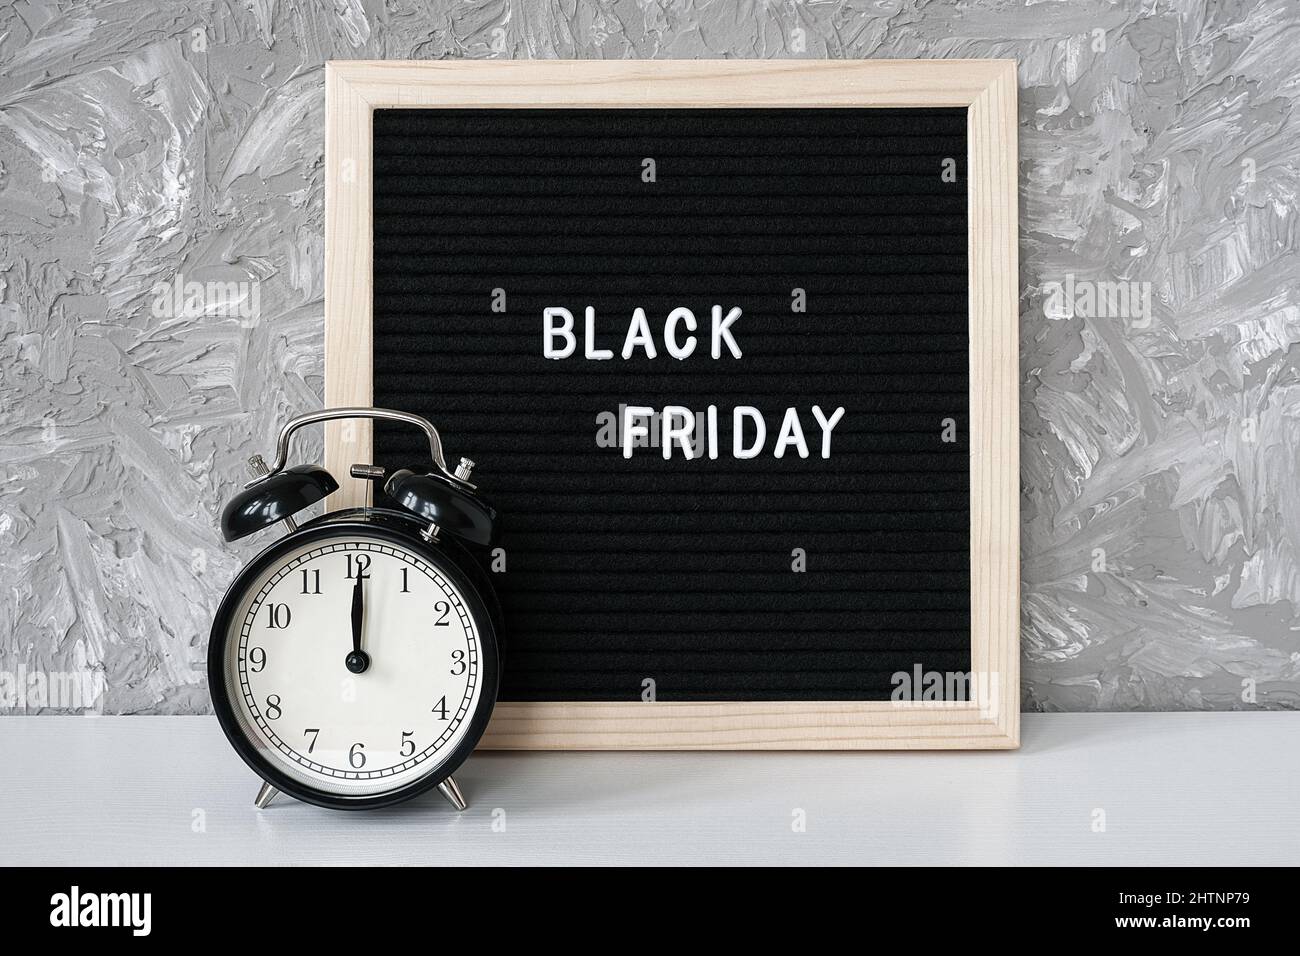 Text Black friday on black letter board and alarm clock on table against grey stone background. Concept Black friday , season sales time. Stock Photo